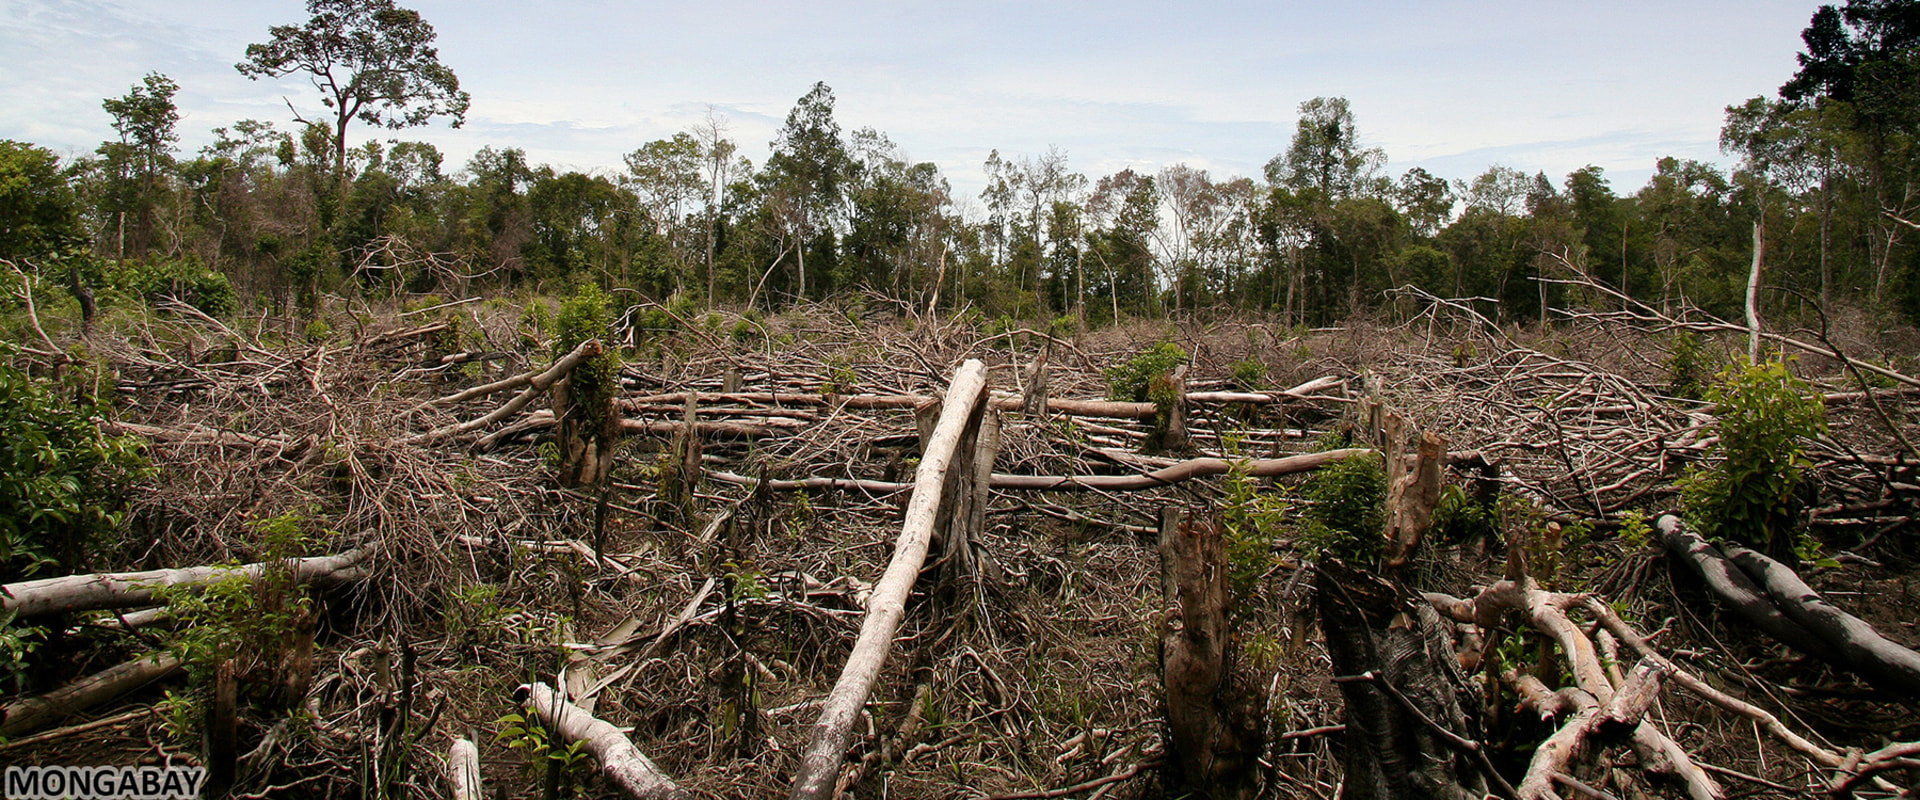 The Impact of Deforestation on Environmental Conservation in Monroe, LA